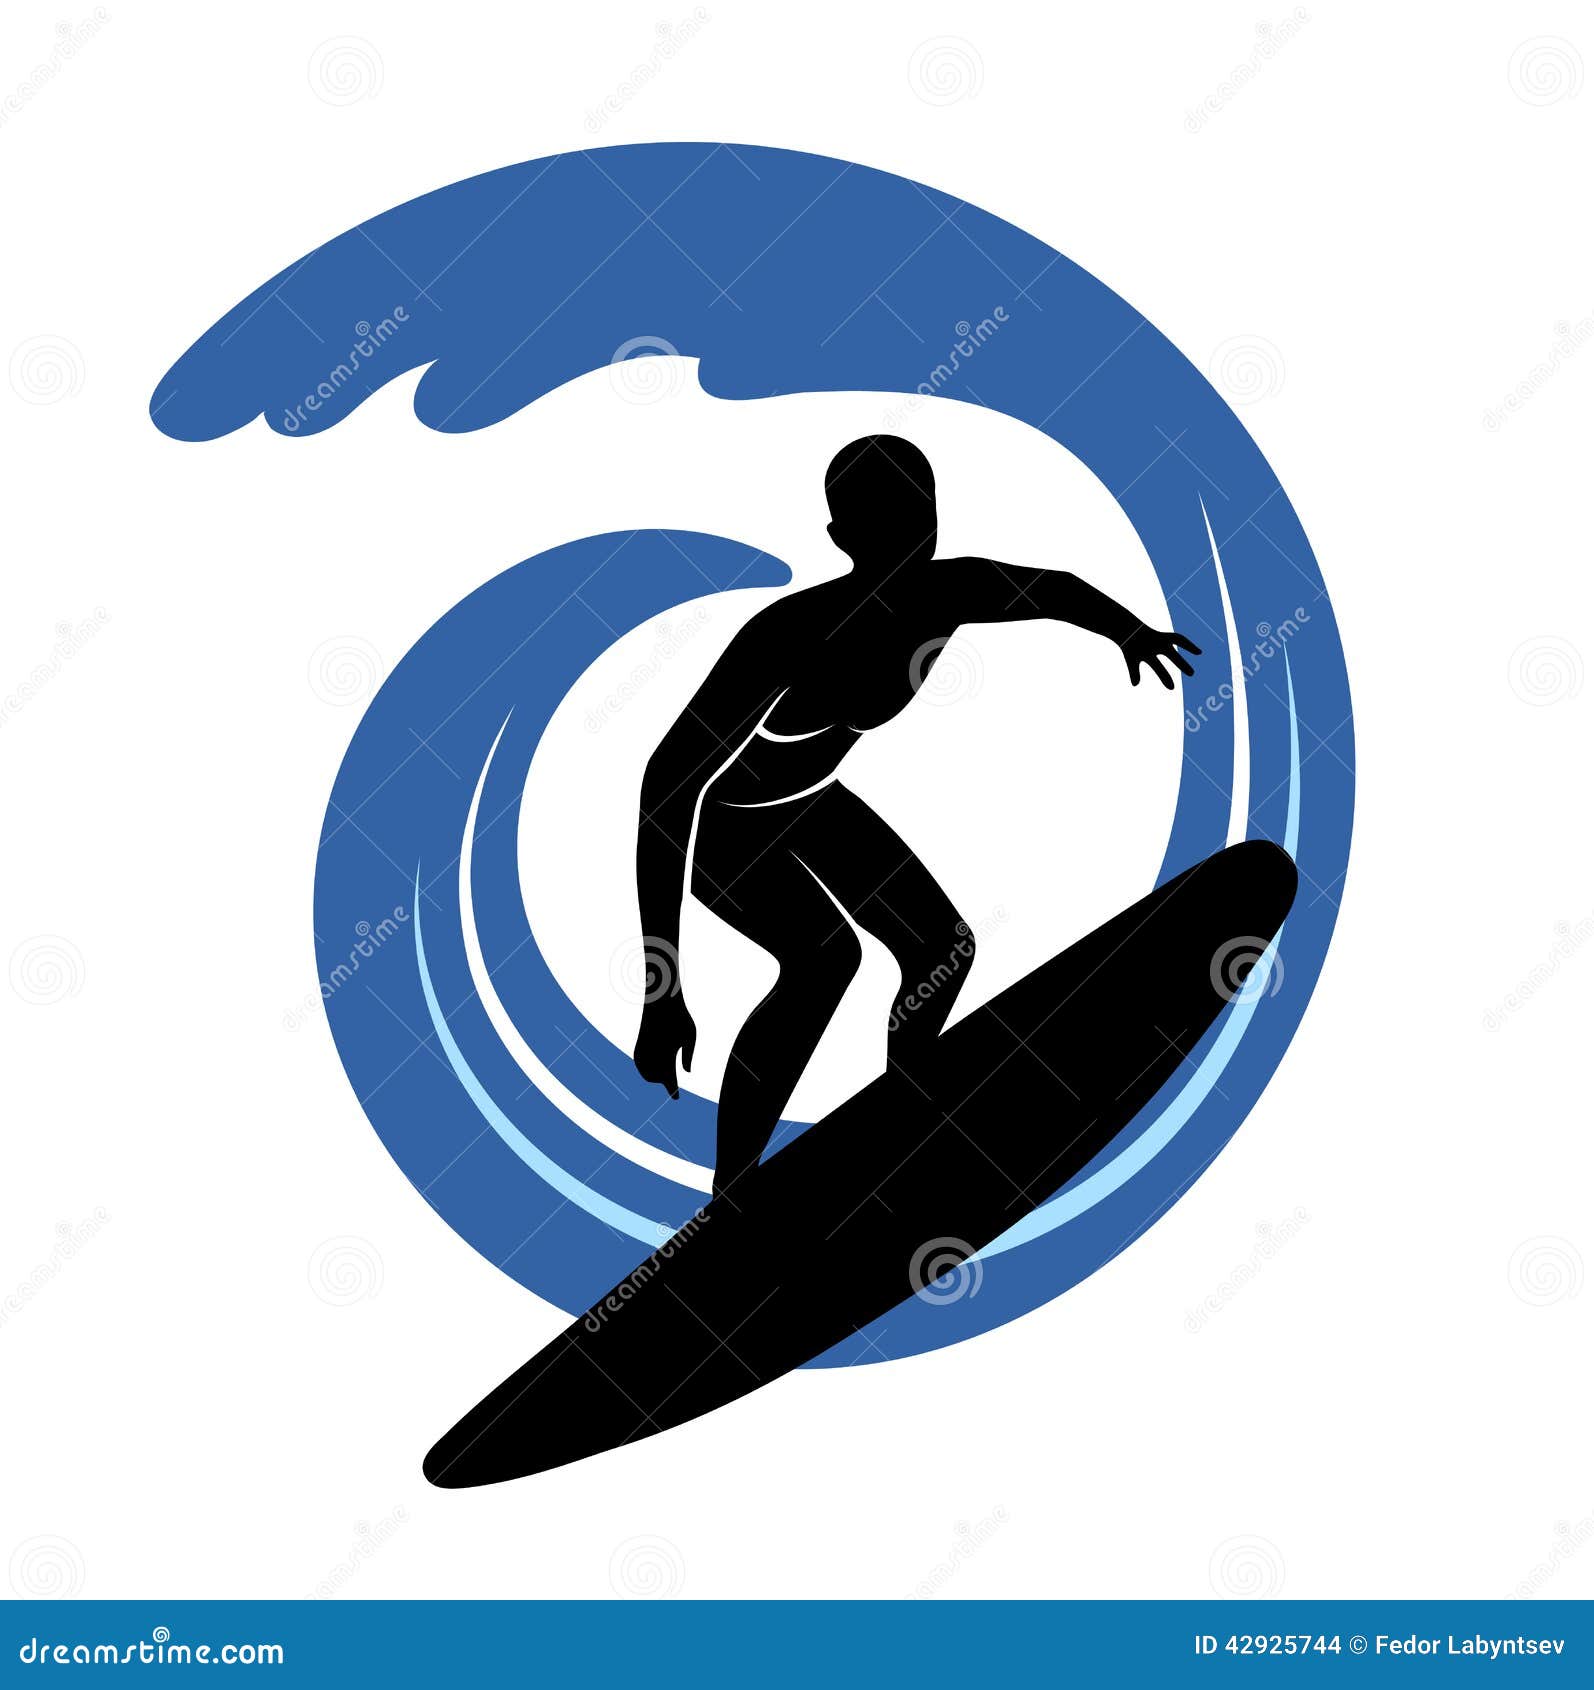 Surfer on Waves an Illustration on a White Background Stock Vector ...